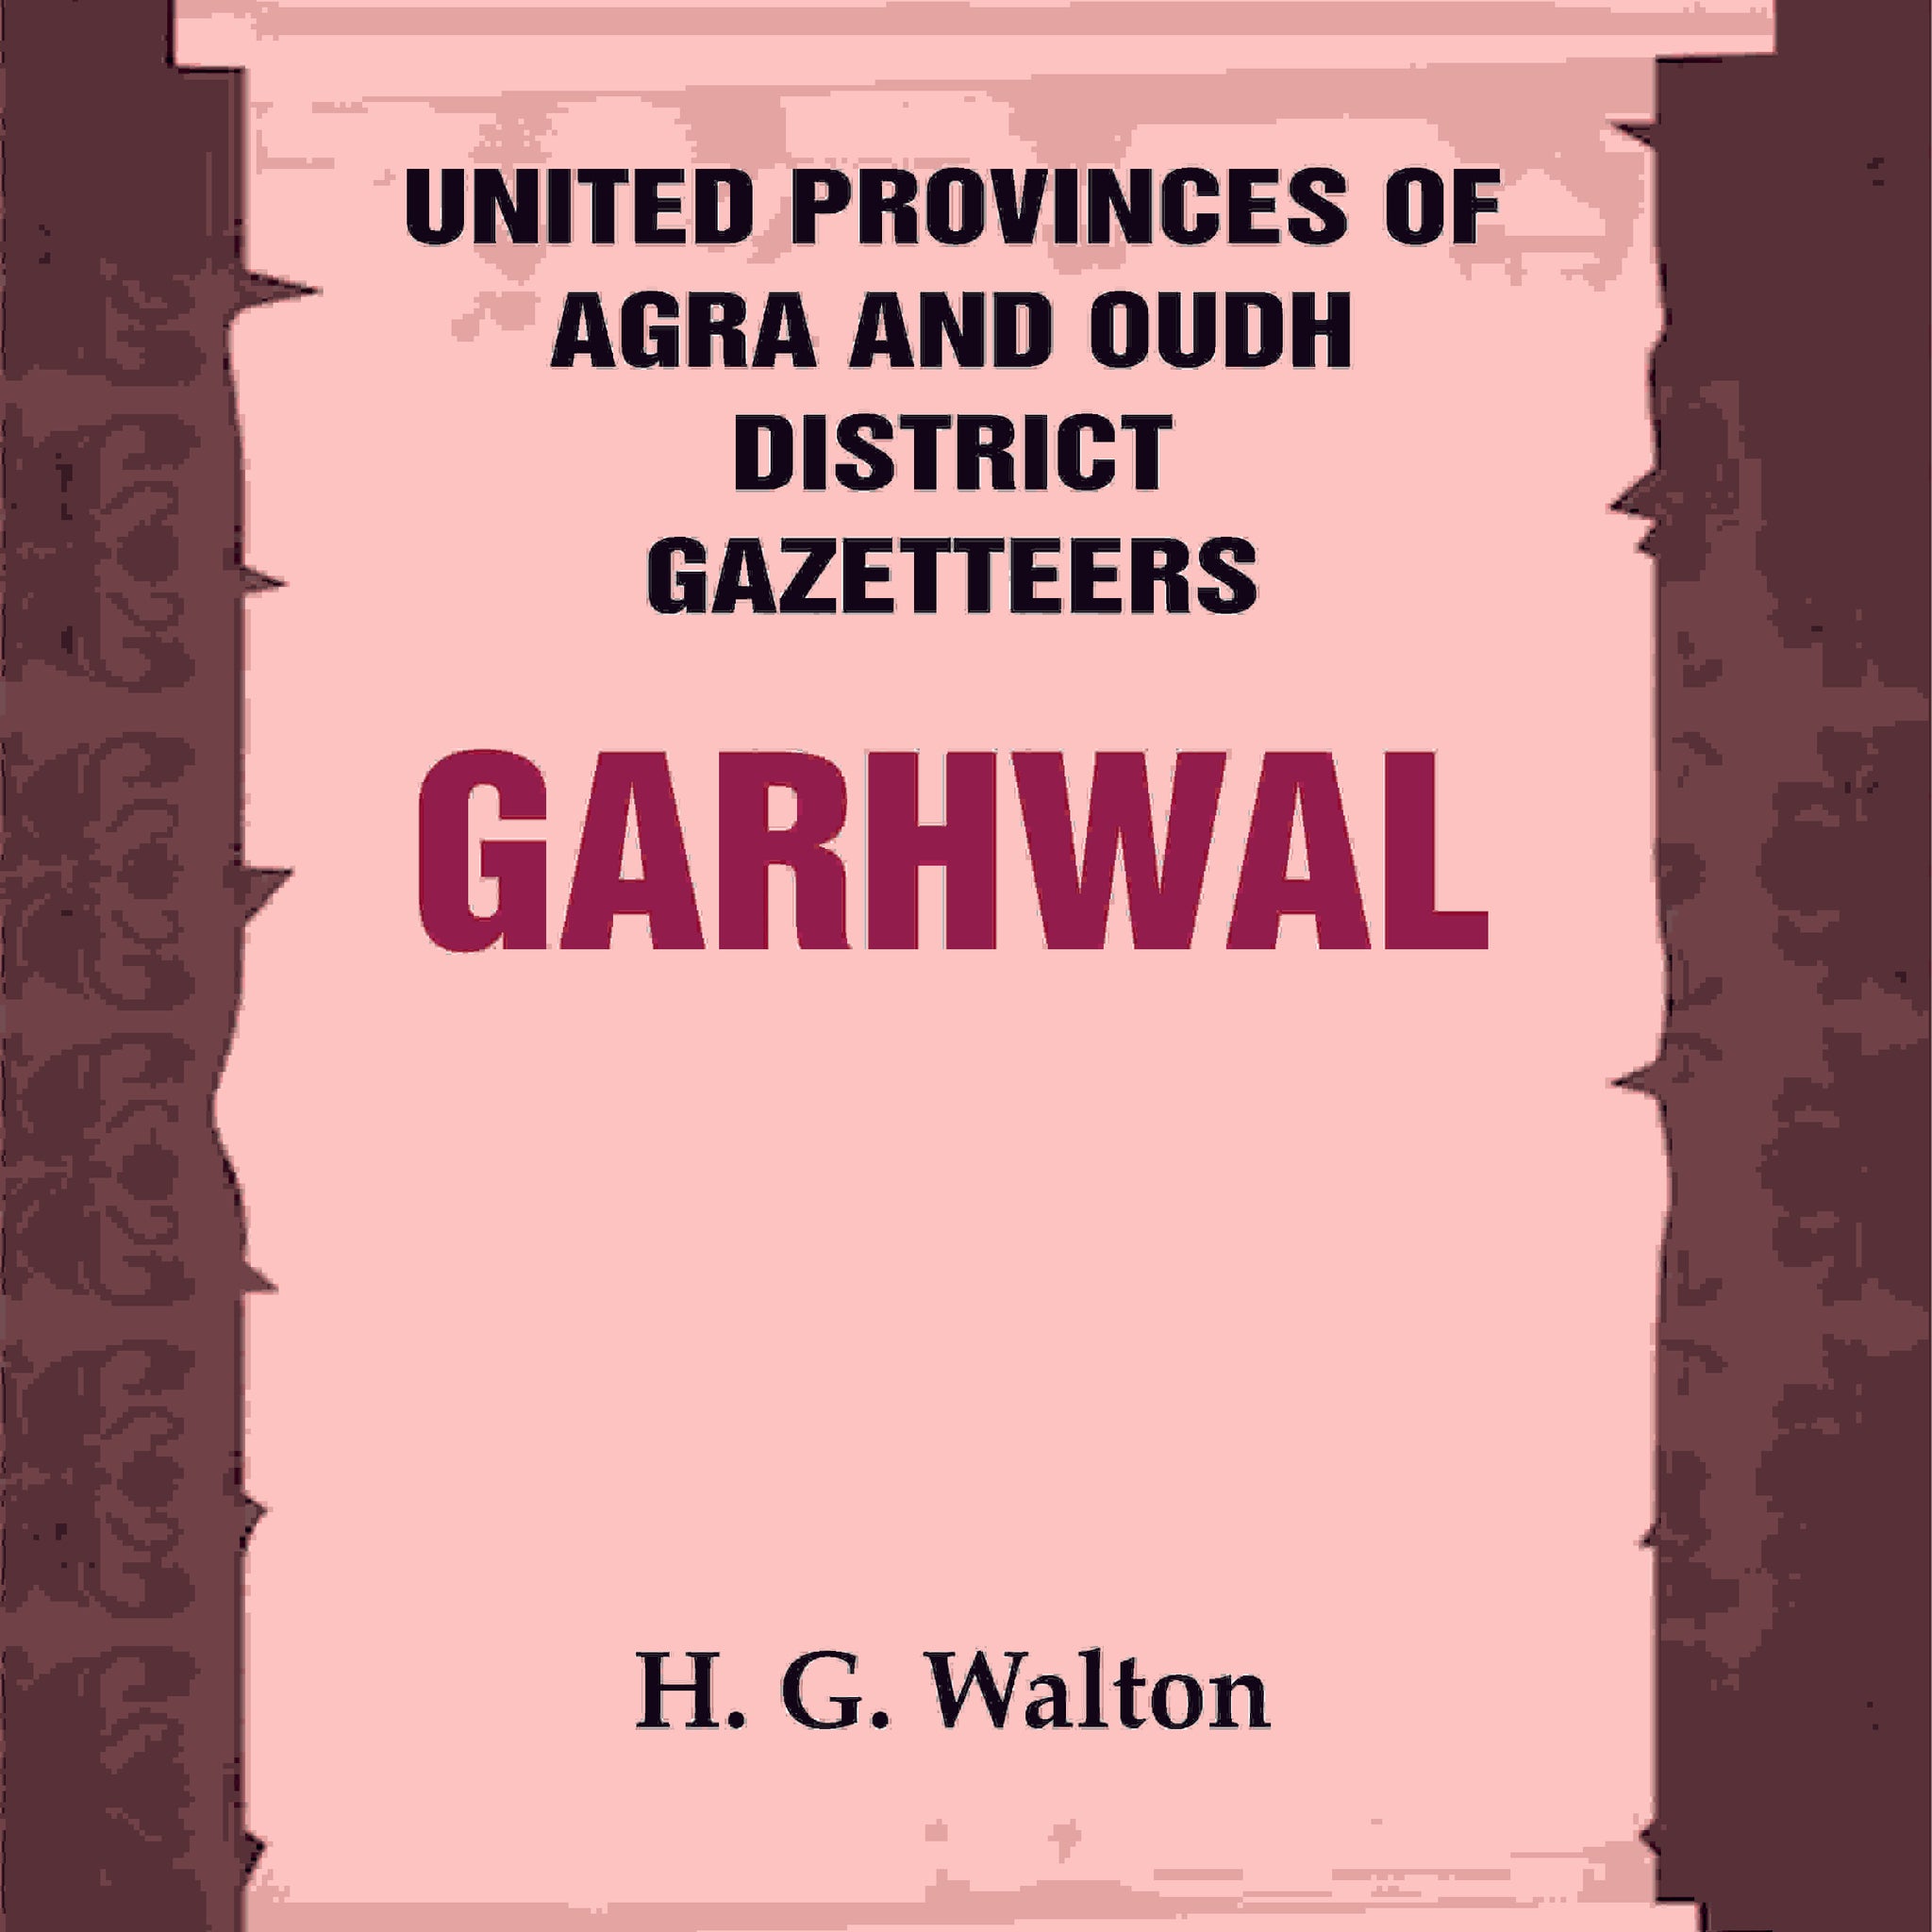 United Provinces of Agra and Oudh District Gazetteers: Garhwal